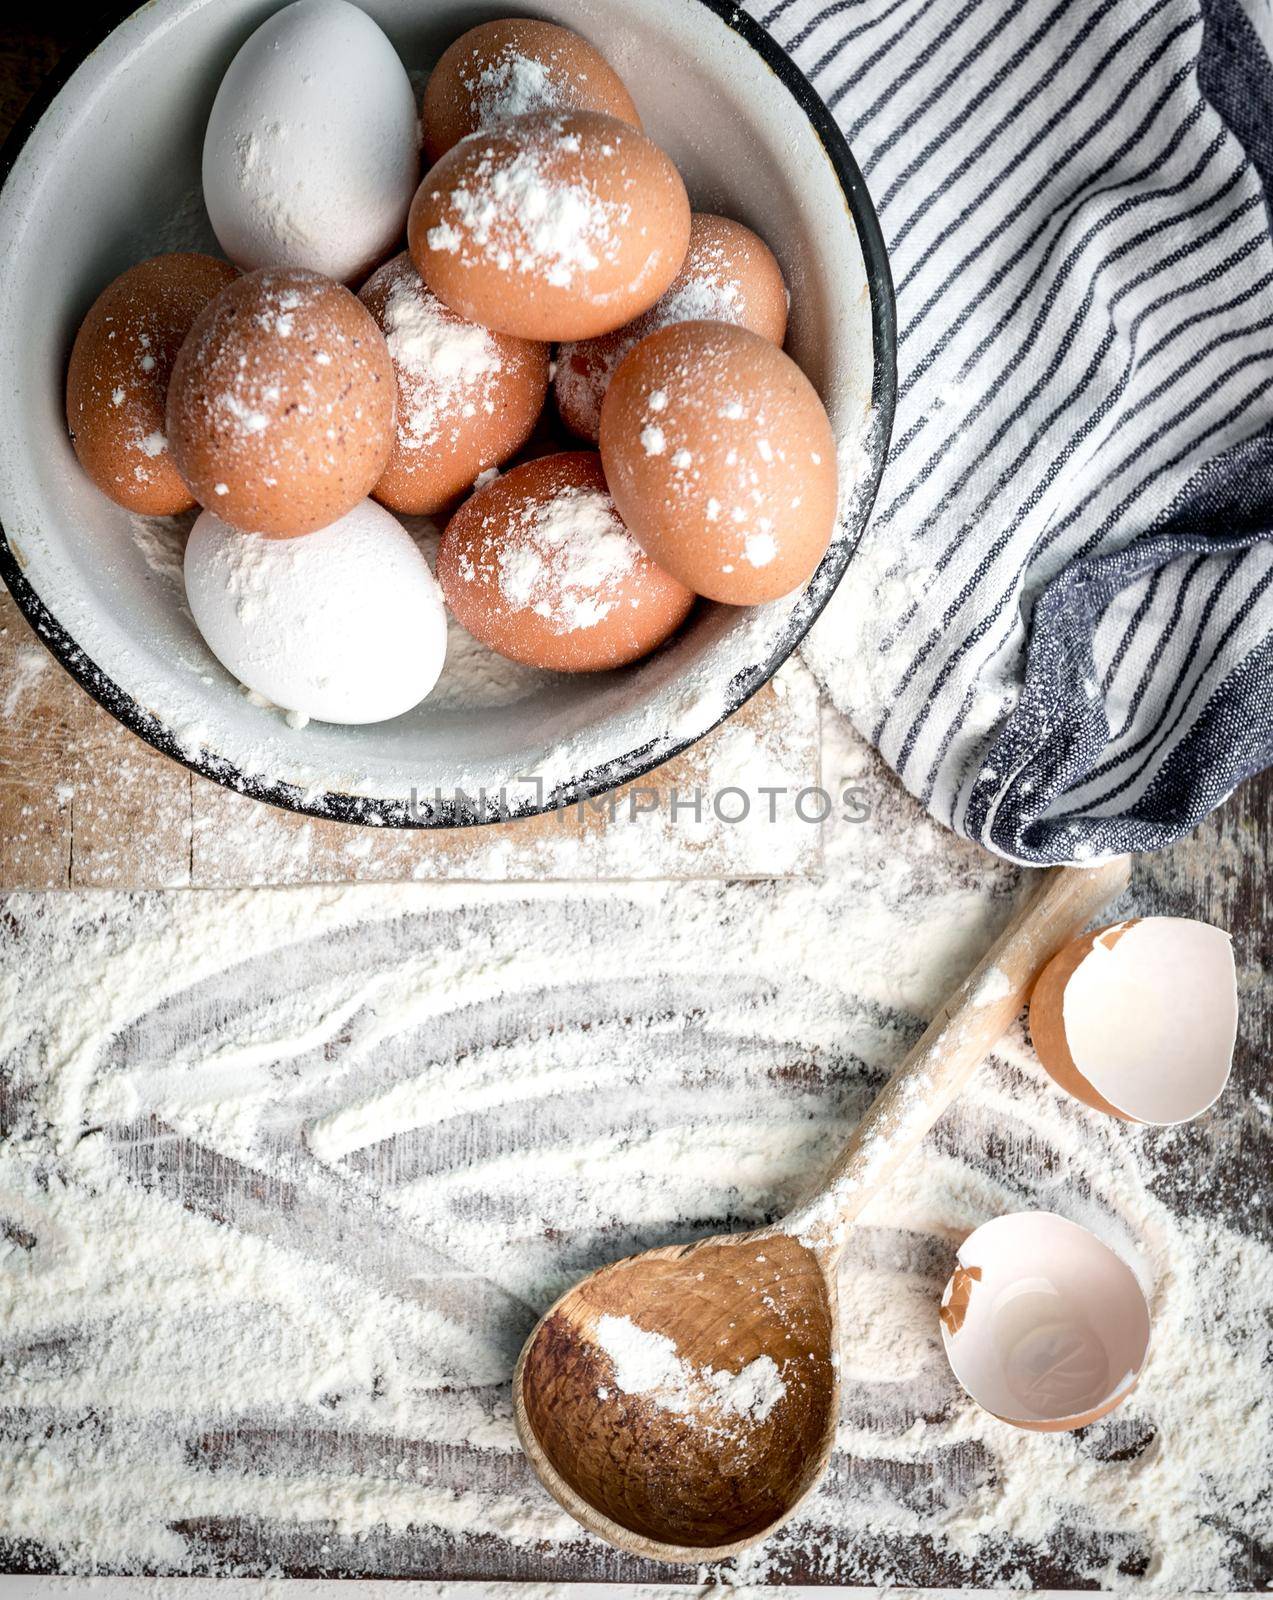 Empty eggshells on table sprinkled with flour, topview by tan4ikk1